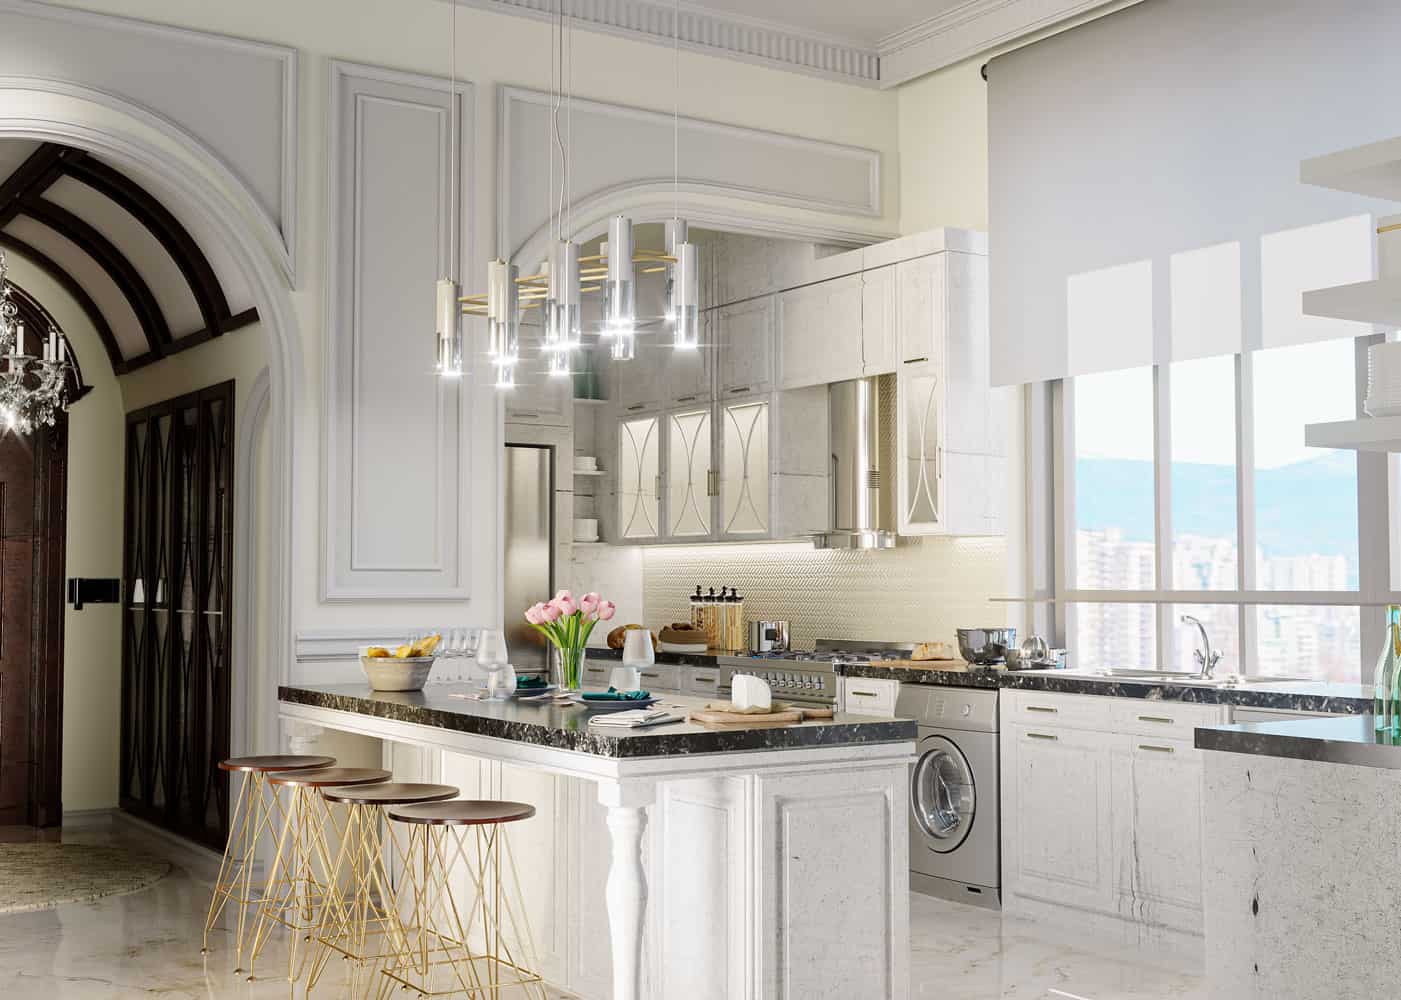 Kitchen 3D Rendering - Archviztech Interior 3d Rendering and Visualization, Vancouver